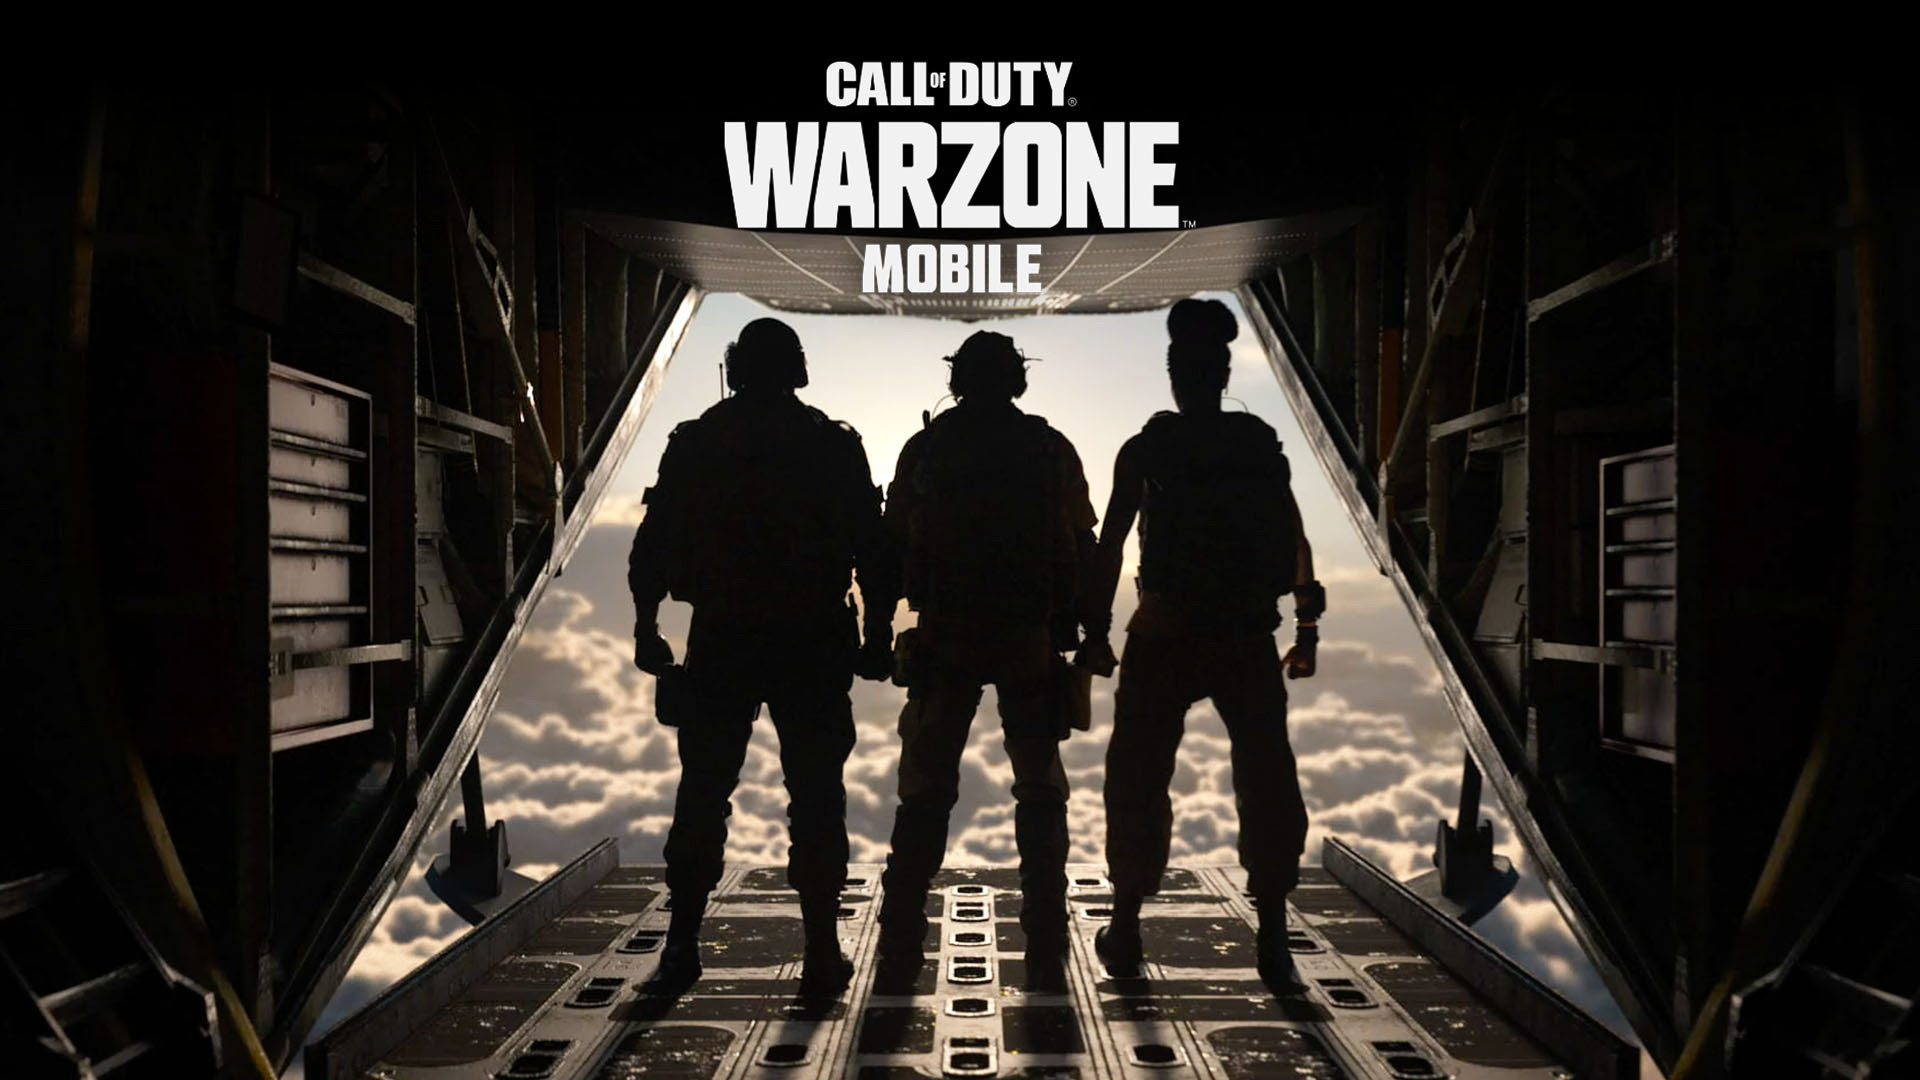 Wall of Duty Warzone mobile